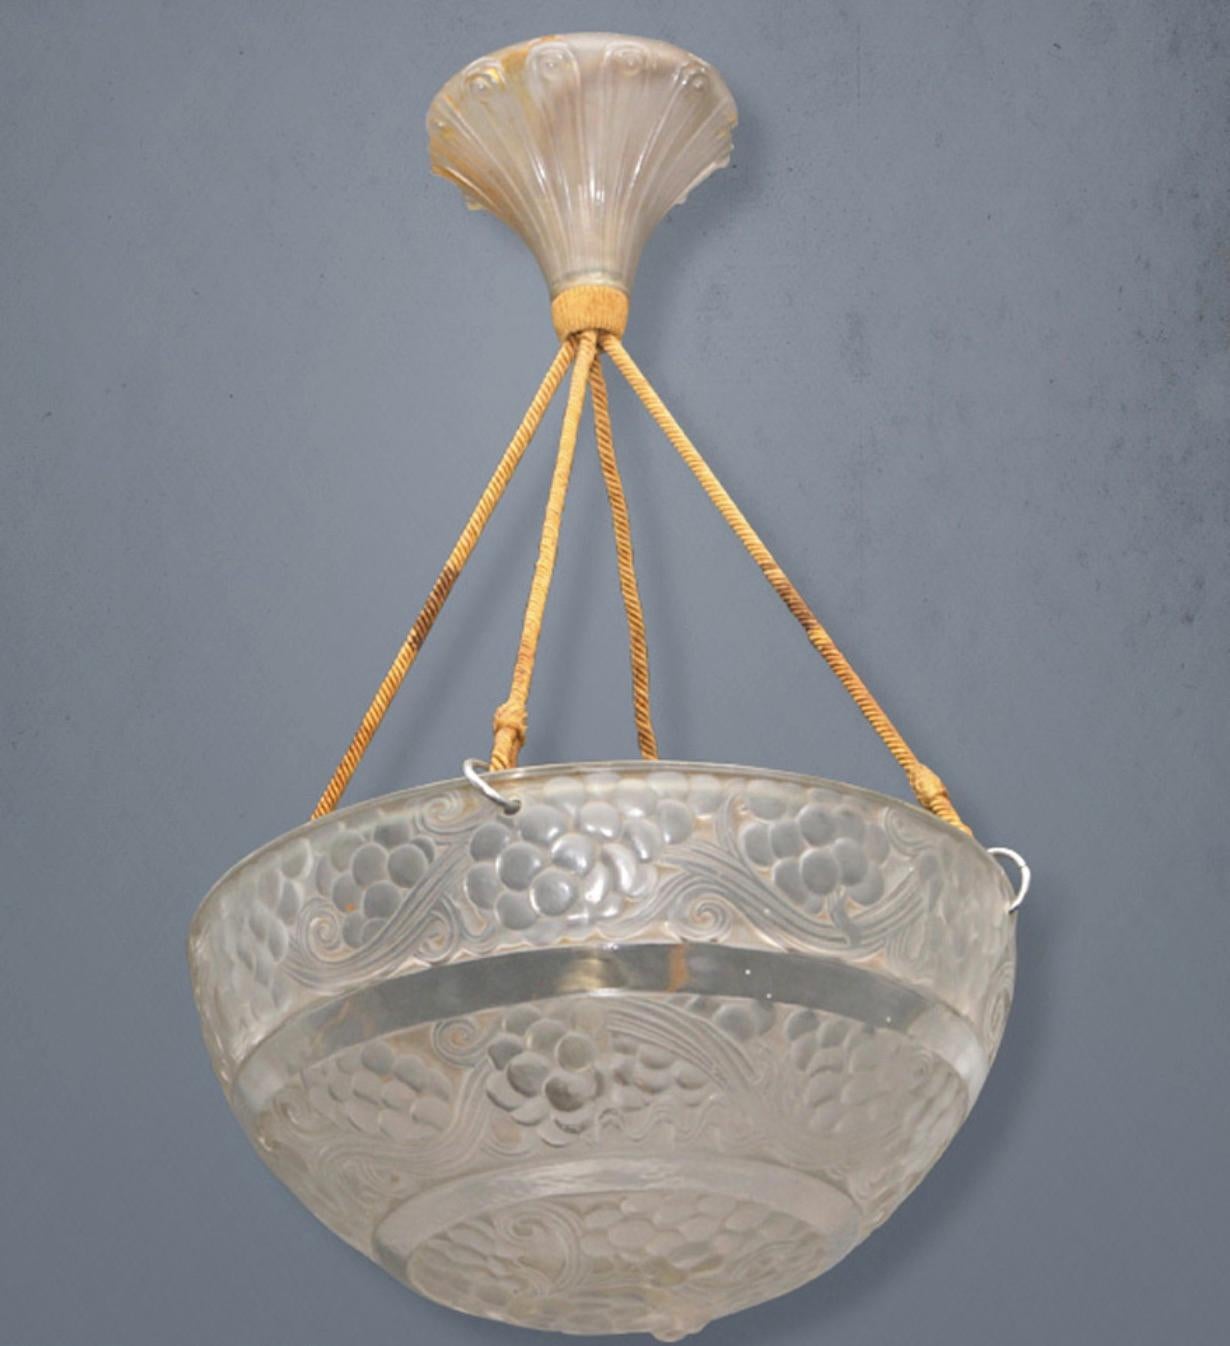 1926 Rene Lalique Saint-Vincent Complet Ceiling Light Chandelier Frosted Glass In Good Condition For Sale In Boulogne Billancourt, FR